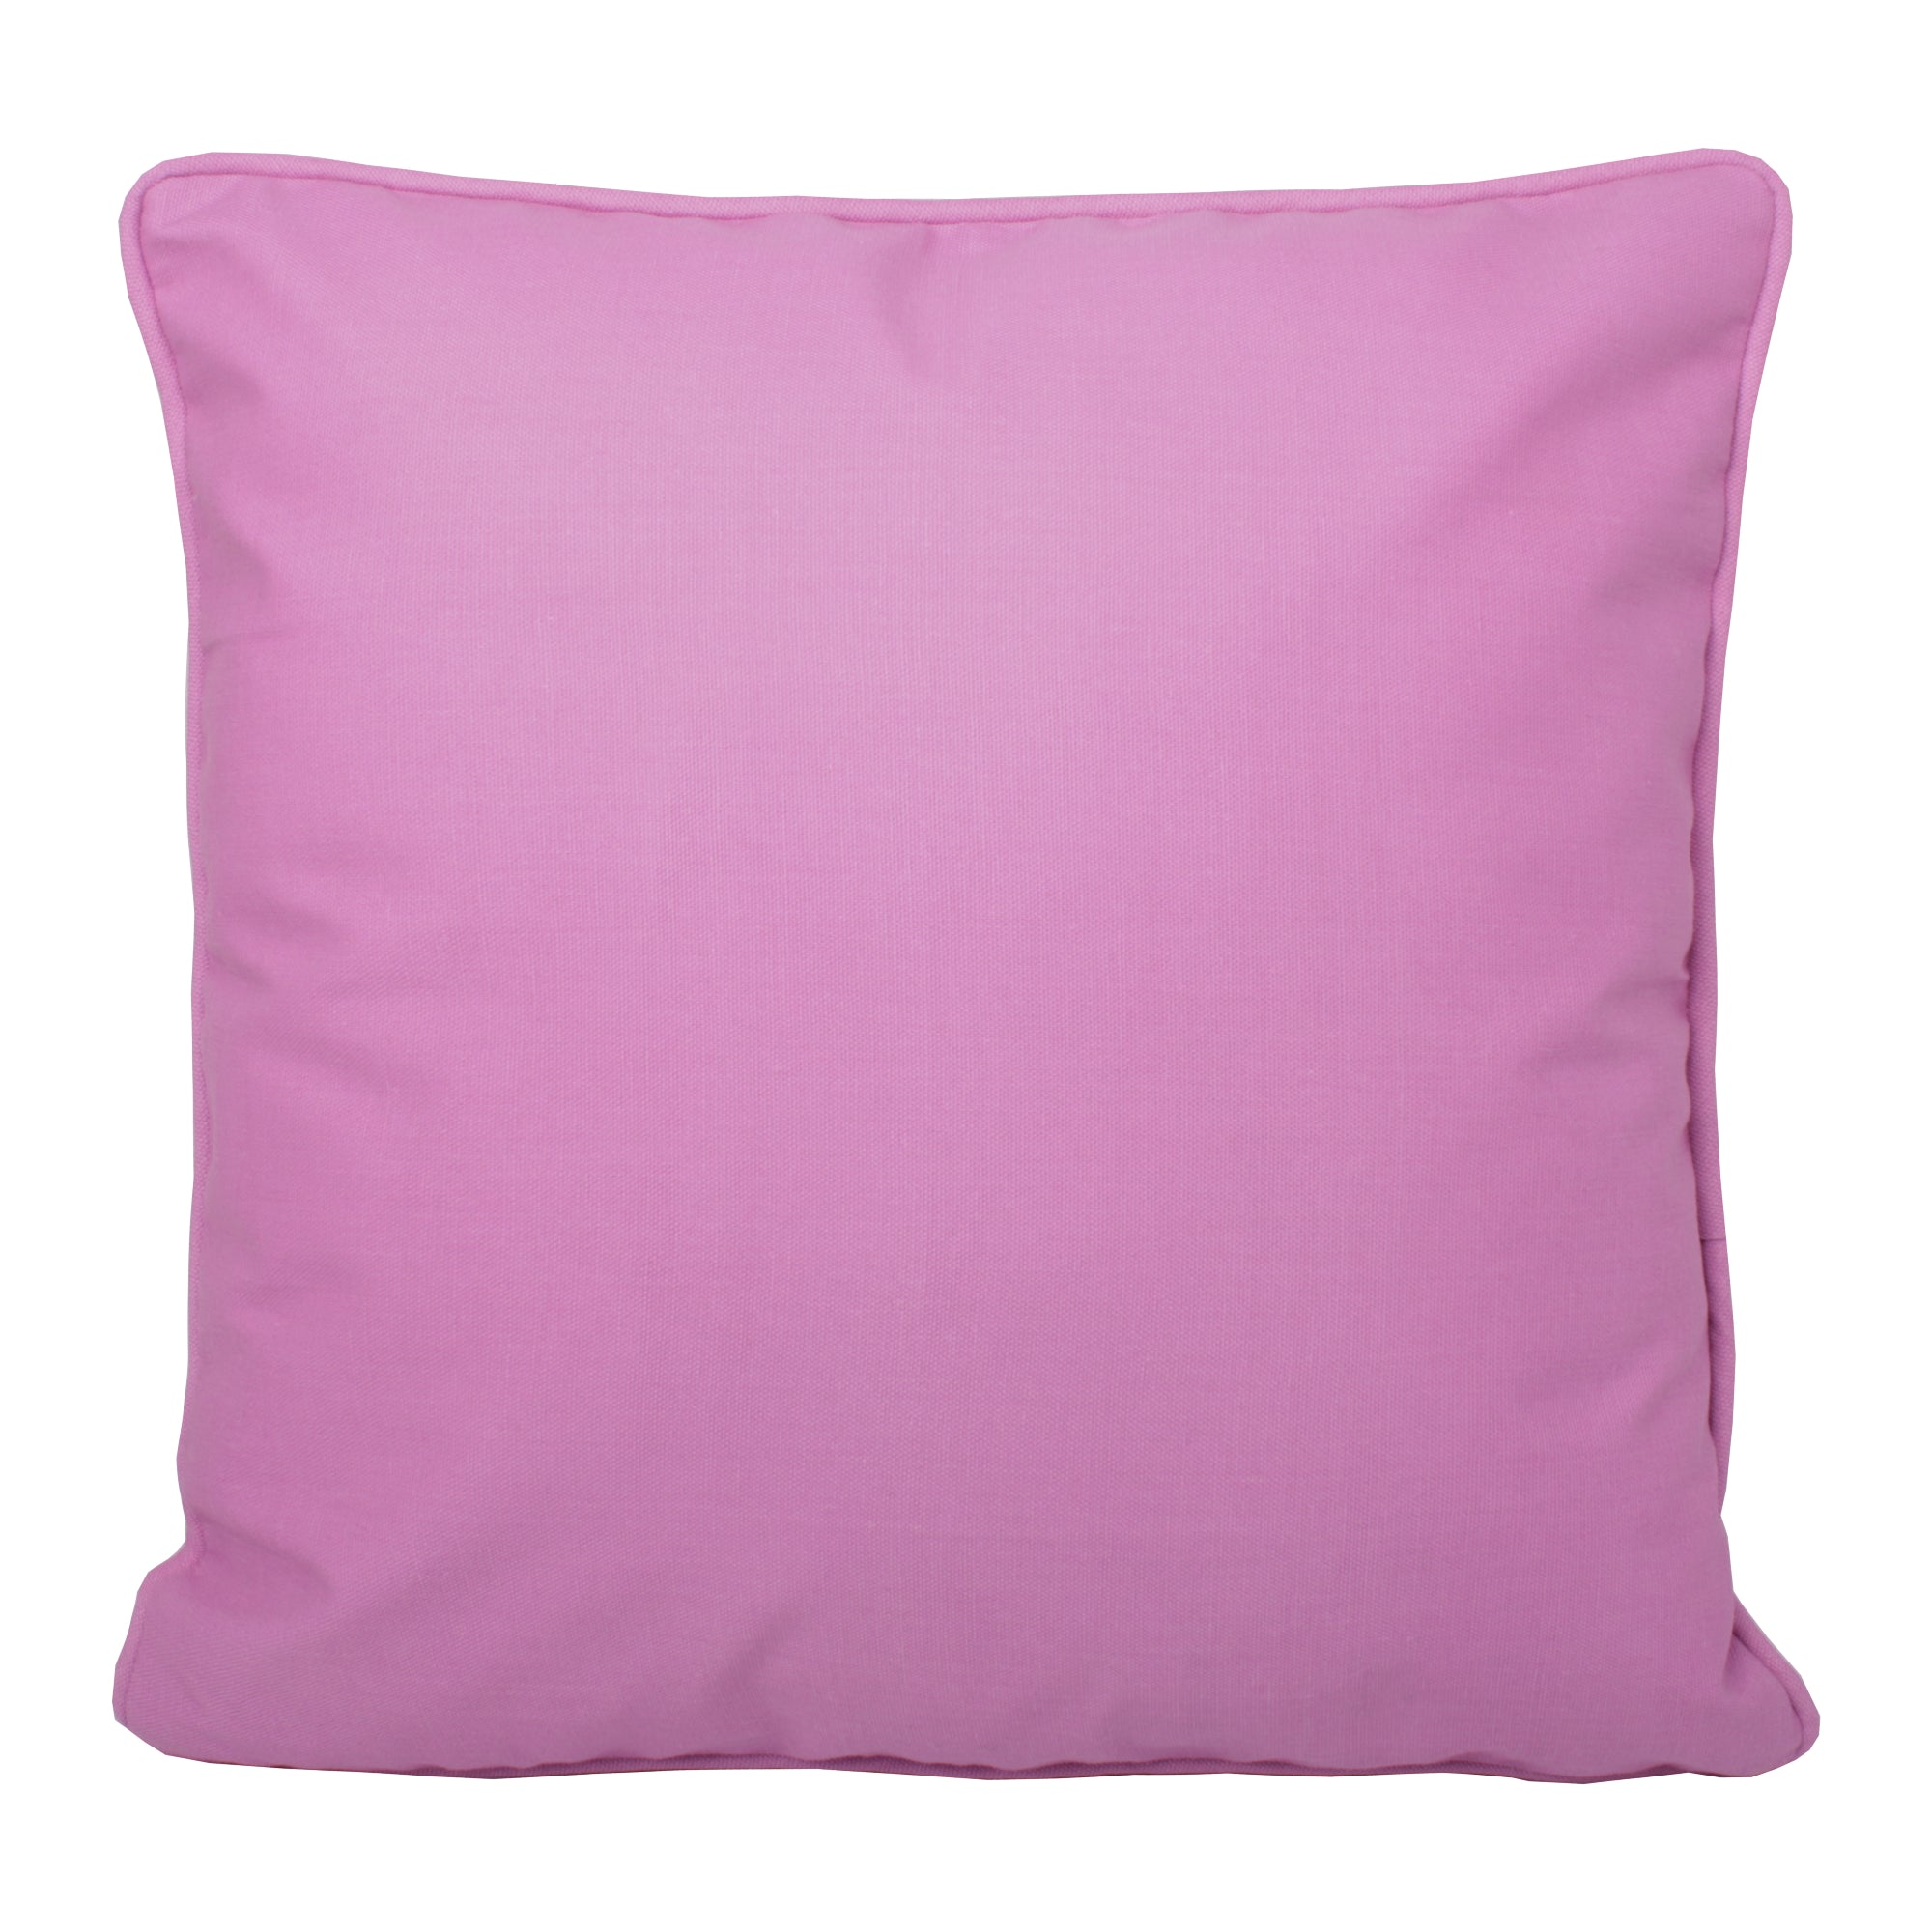 Filled Outdoor Cushion Plain Dye by Fusion in Pink